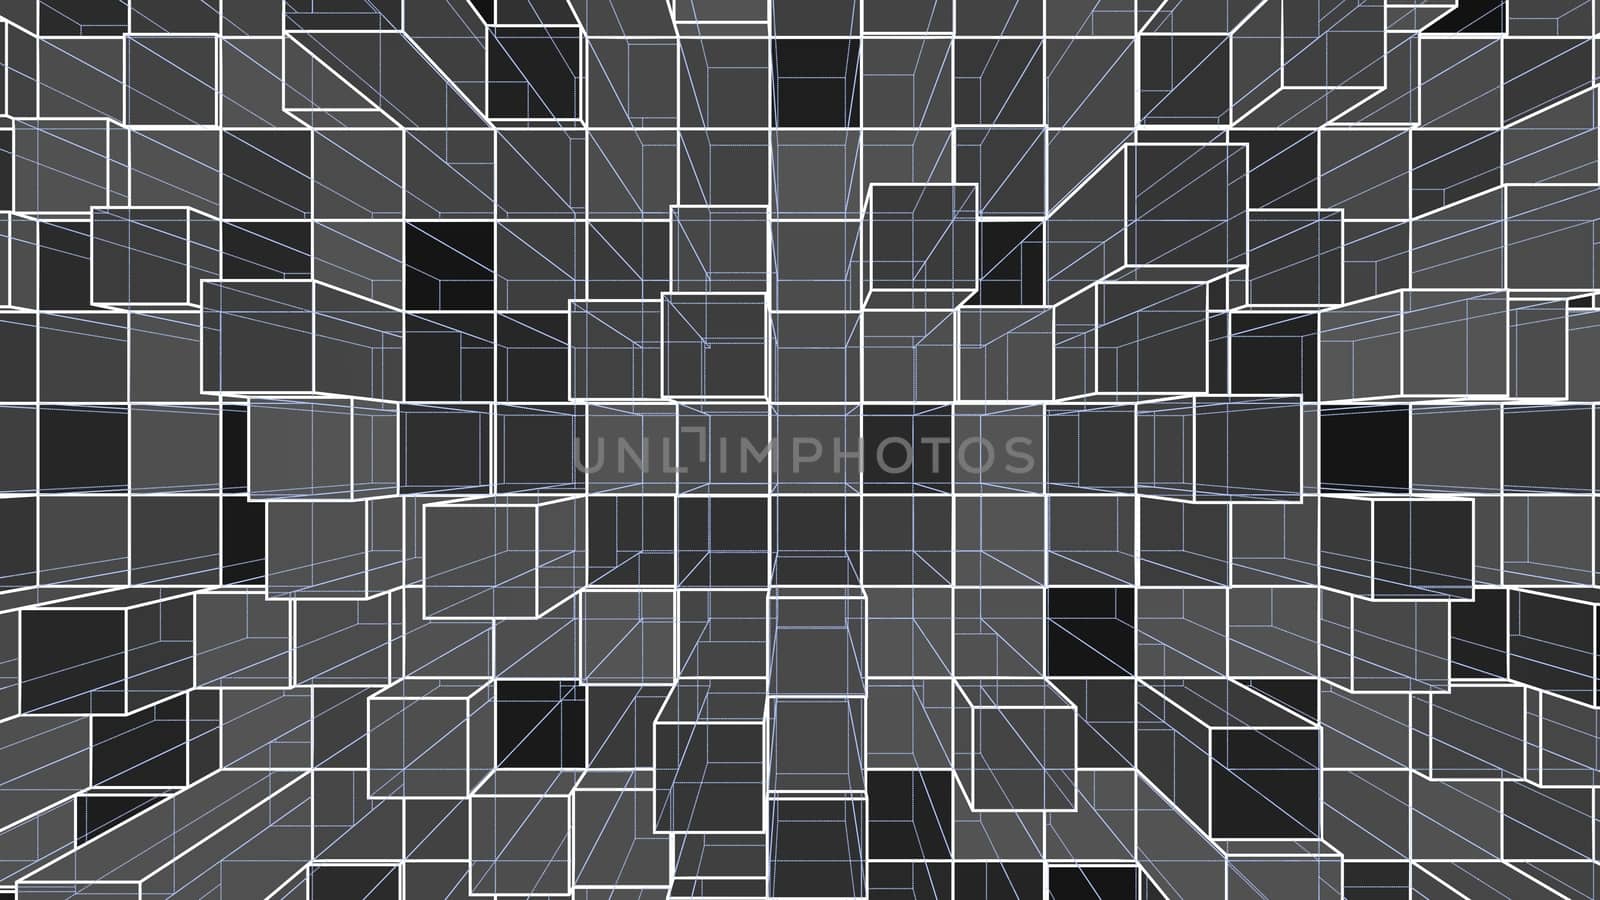 Abstract background of colorful outline cubes. 3D illustration. Wire-frame style.